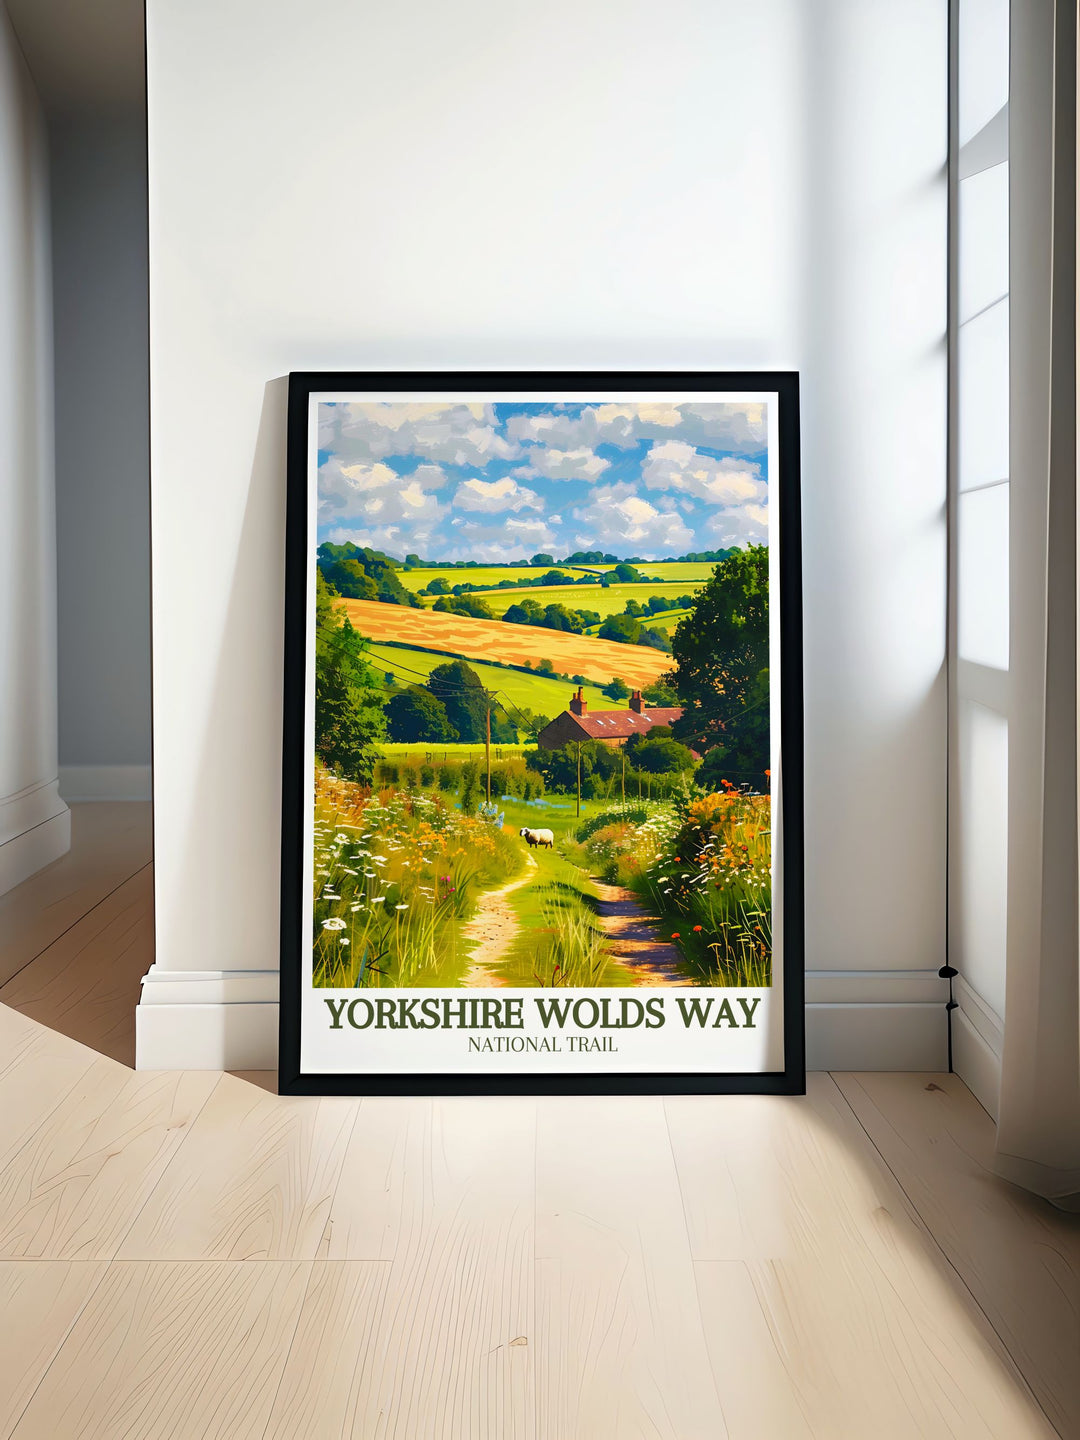 Detailed fine art print capturing the serene beauty of the Yorkshire Wolds Way, a national trail in the UK. The vibrant colors and intricate details showcase the rolling hills and lush landscapes, inviting viewers to experience the tranquility and charm of this hidden gem, perfect for nature lovers and art enthusiasts.